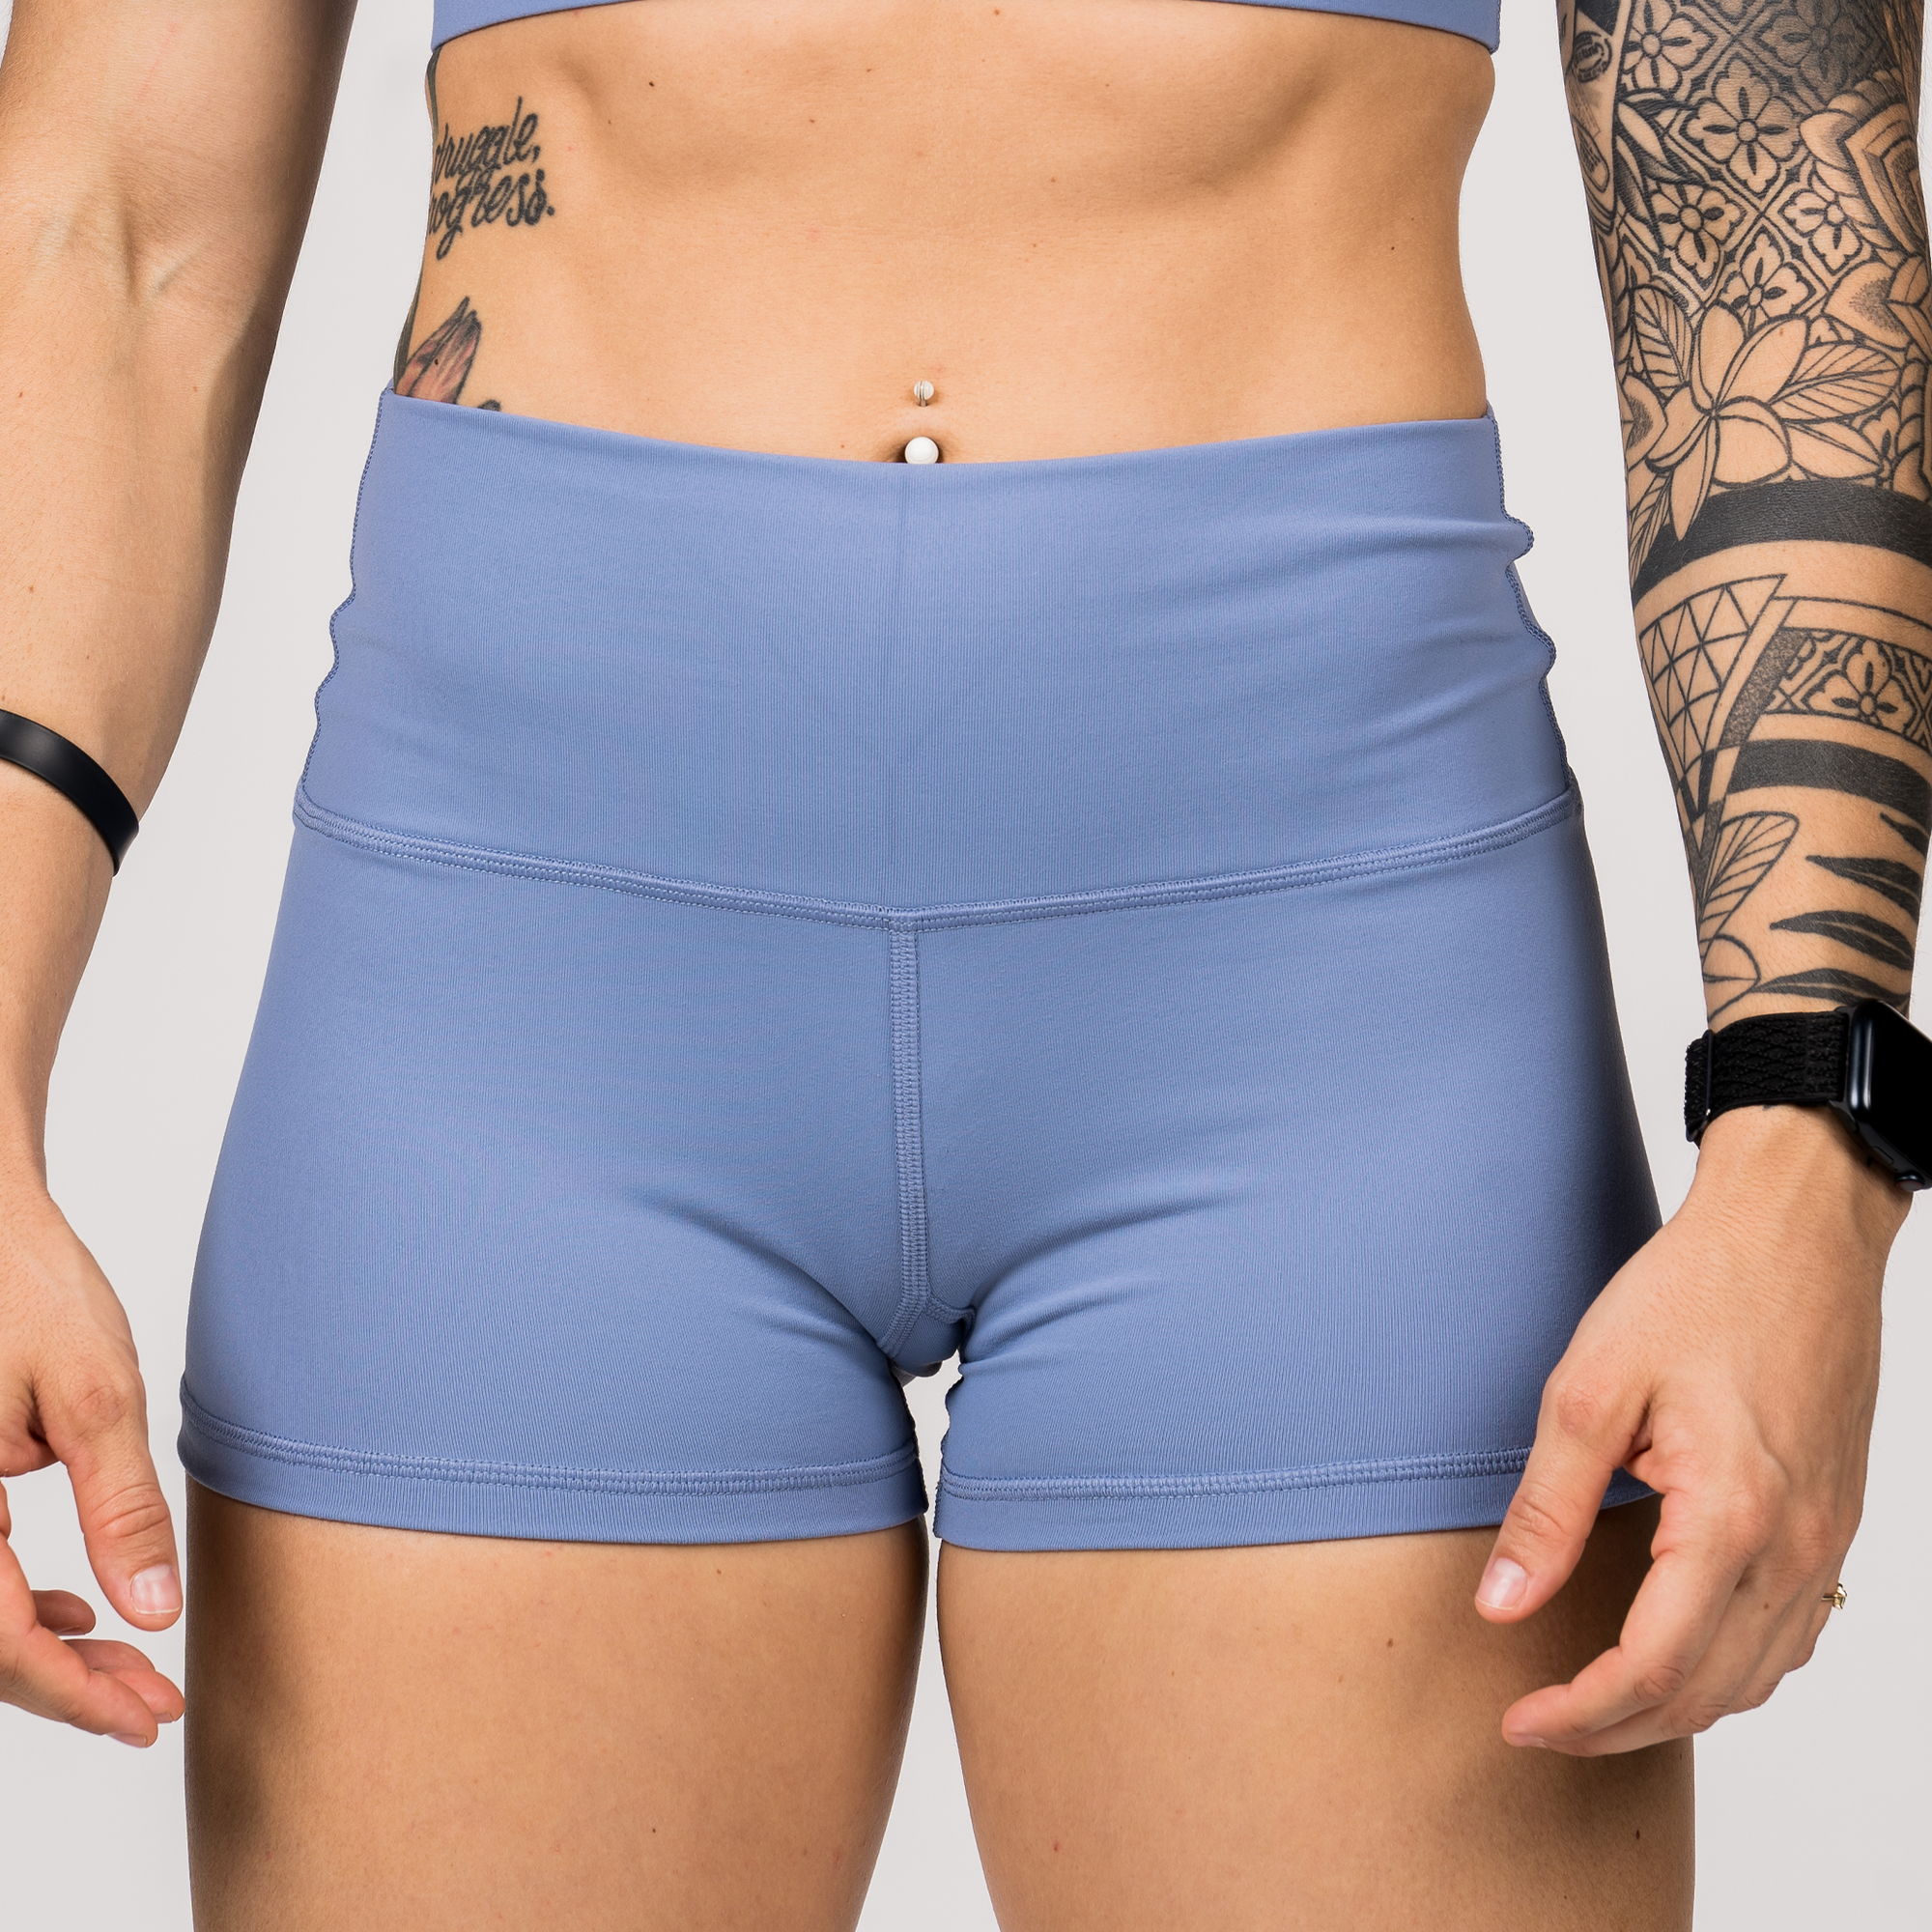 Release Date April 22nd - NEW  High Waist Periwinkle Blue - Savage Barbell Apparel